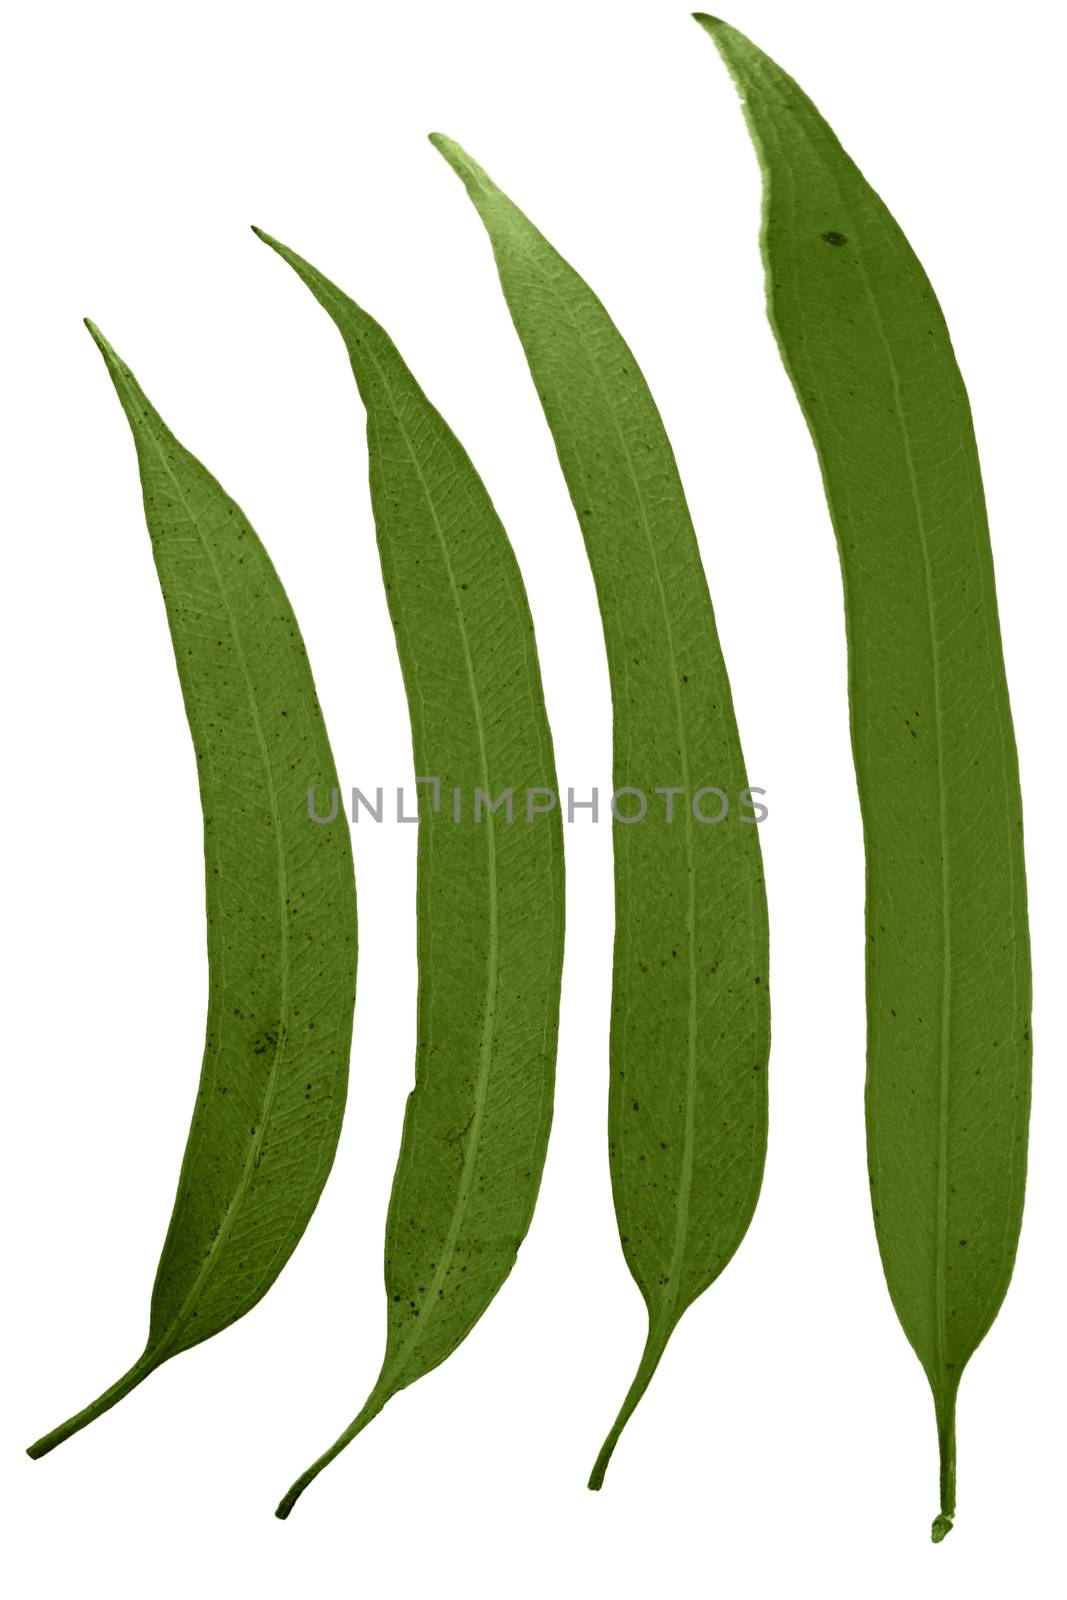 Leaves of Corymbia citriodora, Lemon Scented Gum by yands